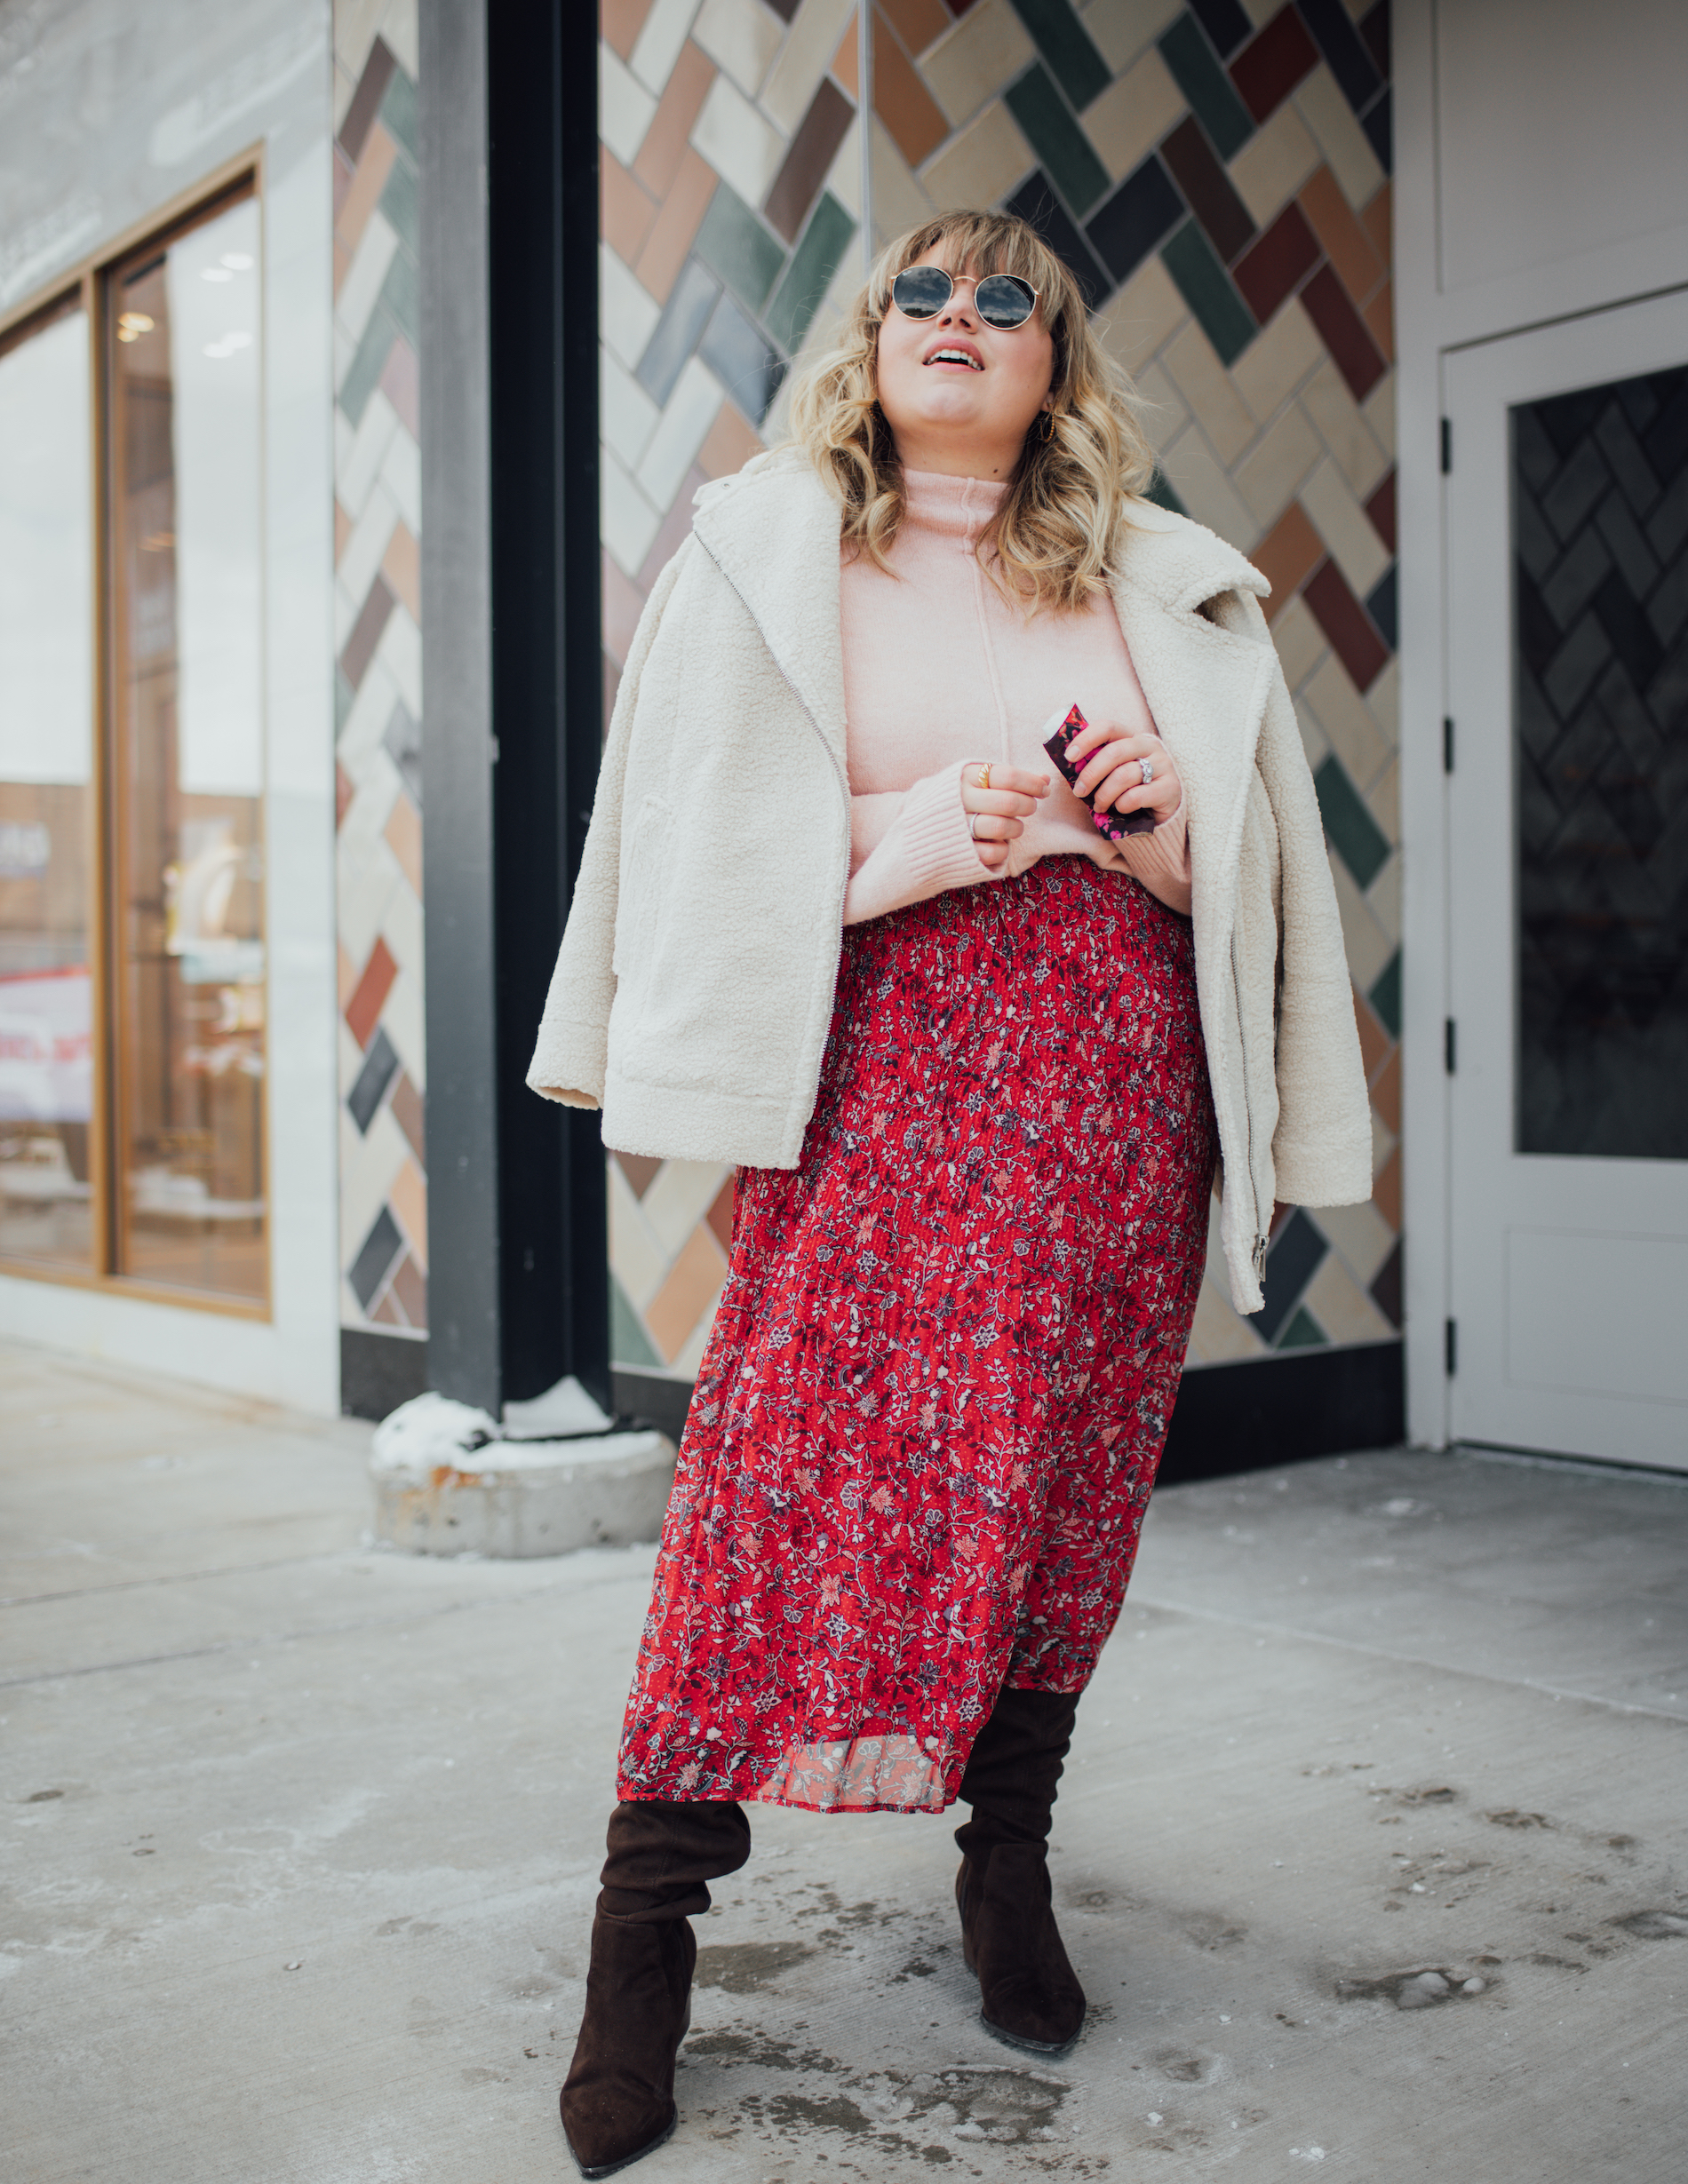 Shopping your closet during a pandemic can be like revisiting the past. In todays post I am challenging you to pull out past favorite outfits. 